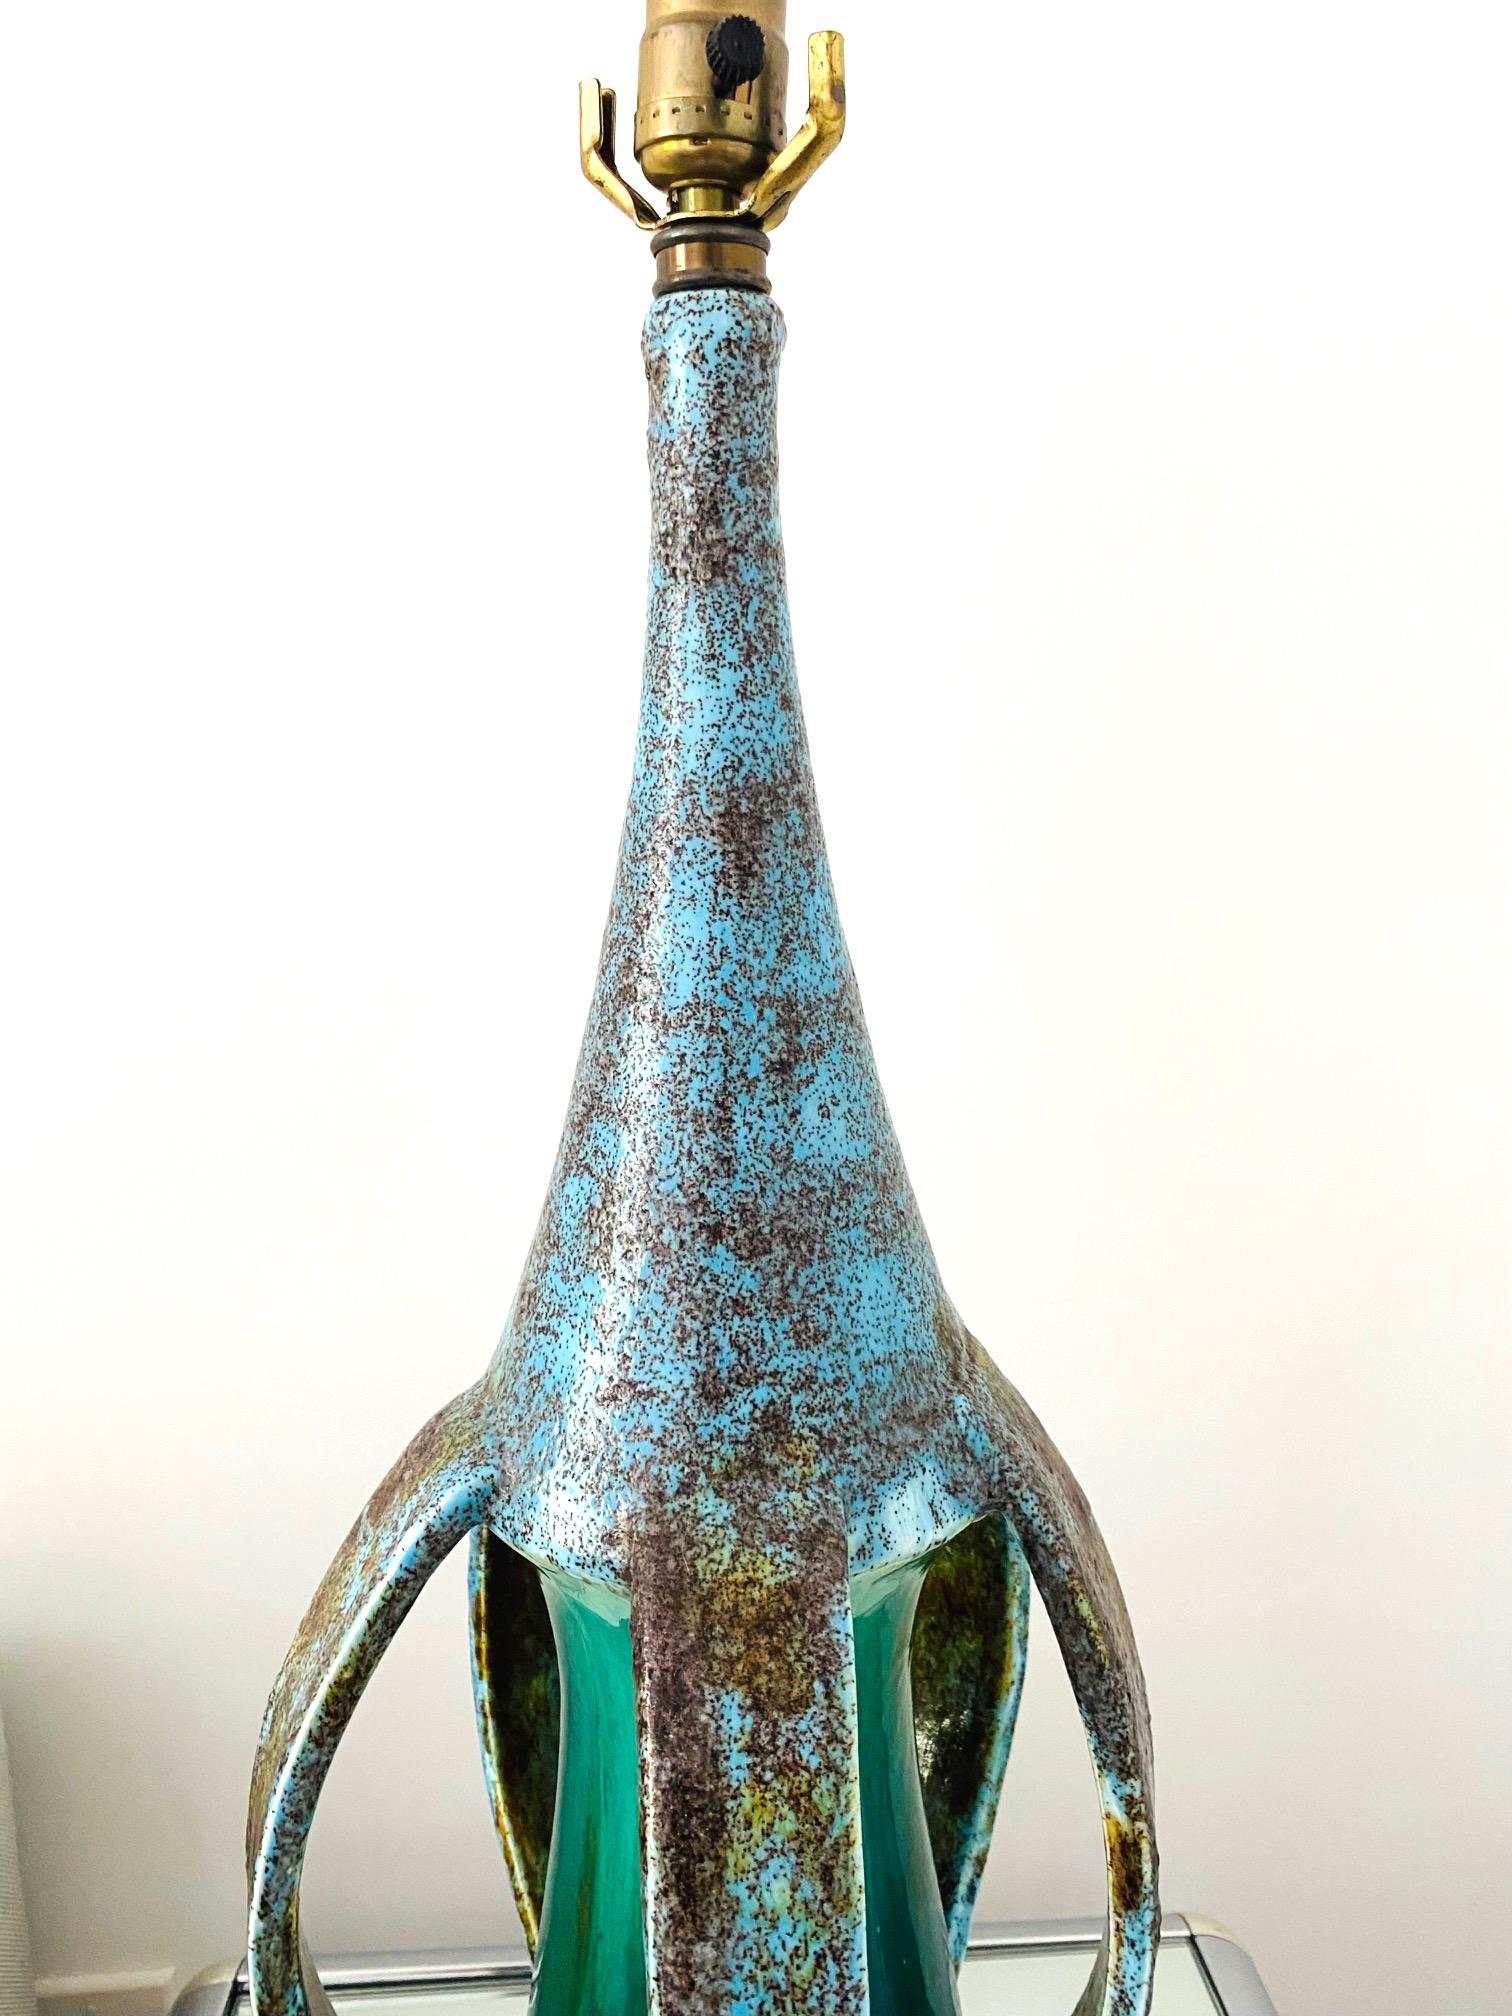 Mid-Century Modern Sculptural Pottery Lamp in Turquoise & Blue, Denmark C. 1960s For Sale 3